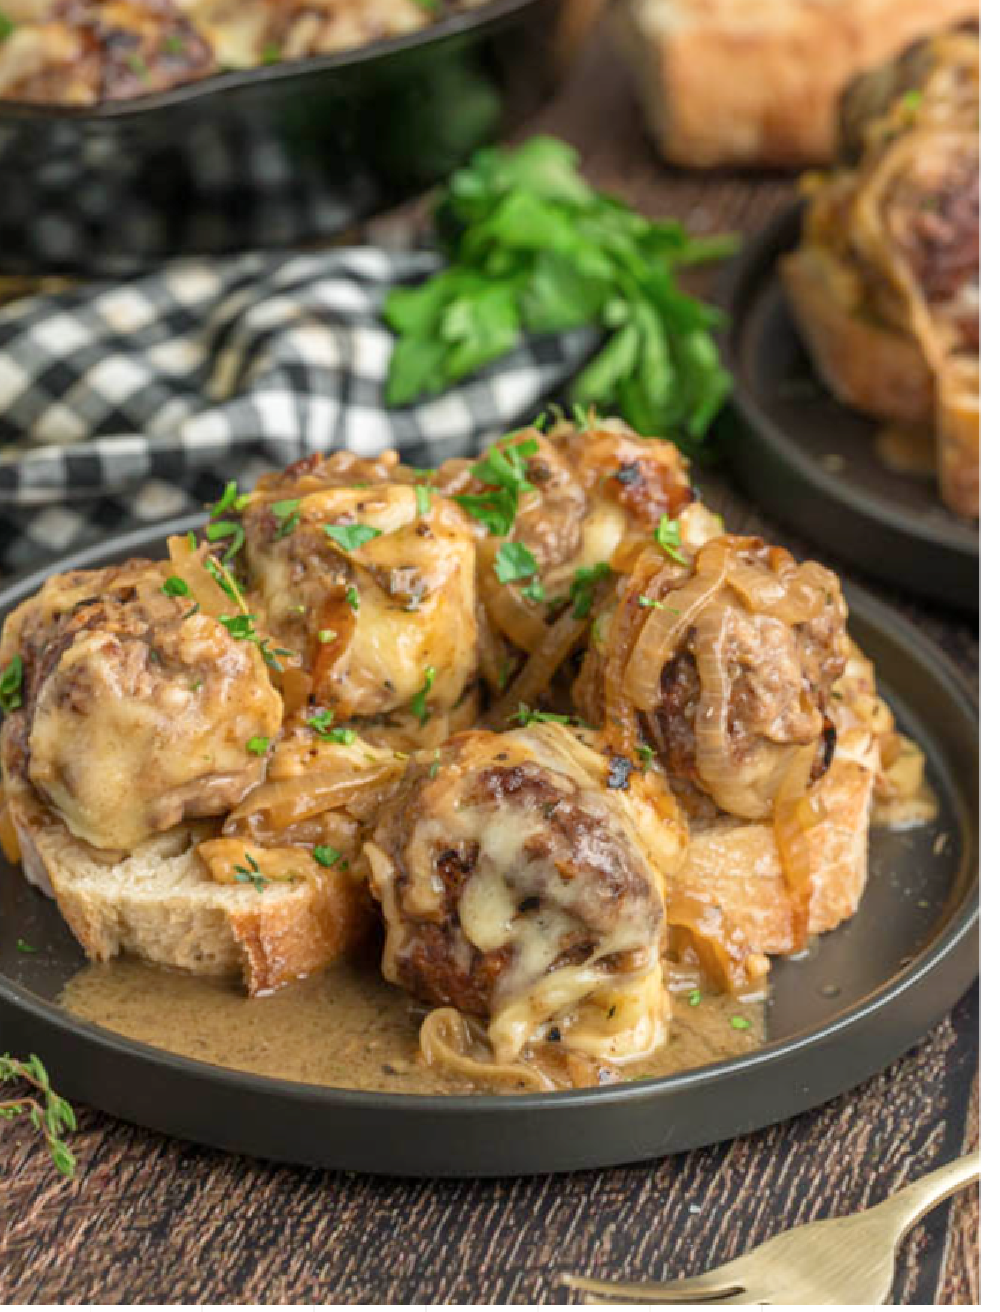 Baked French Onion meatballs on a toasty piece of bread